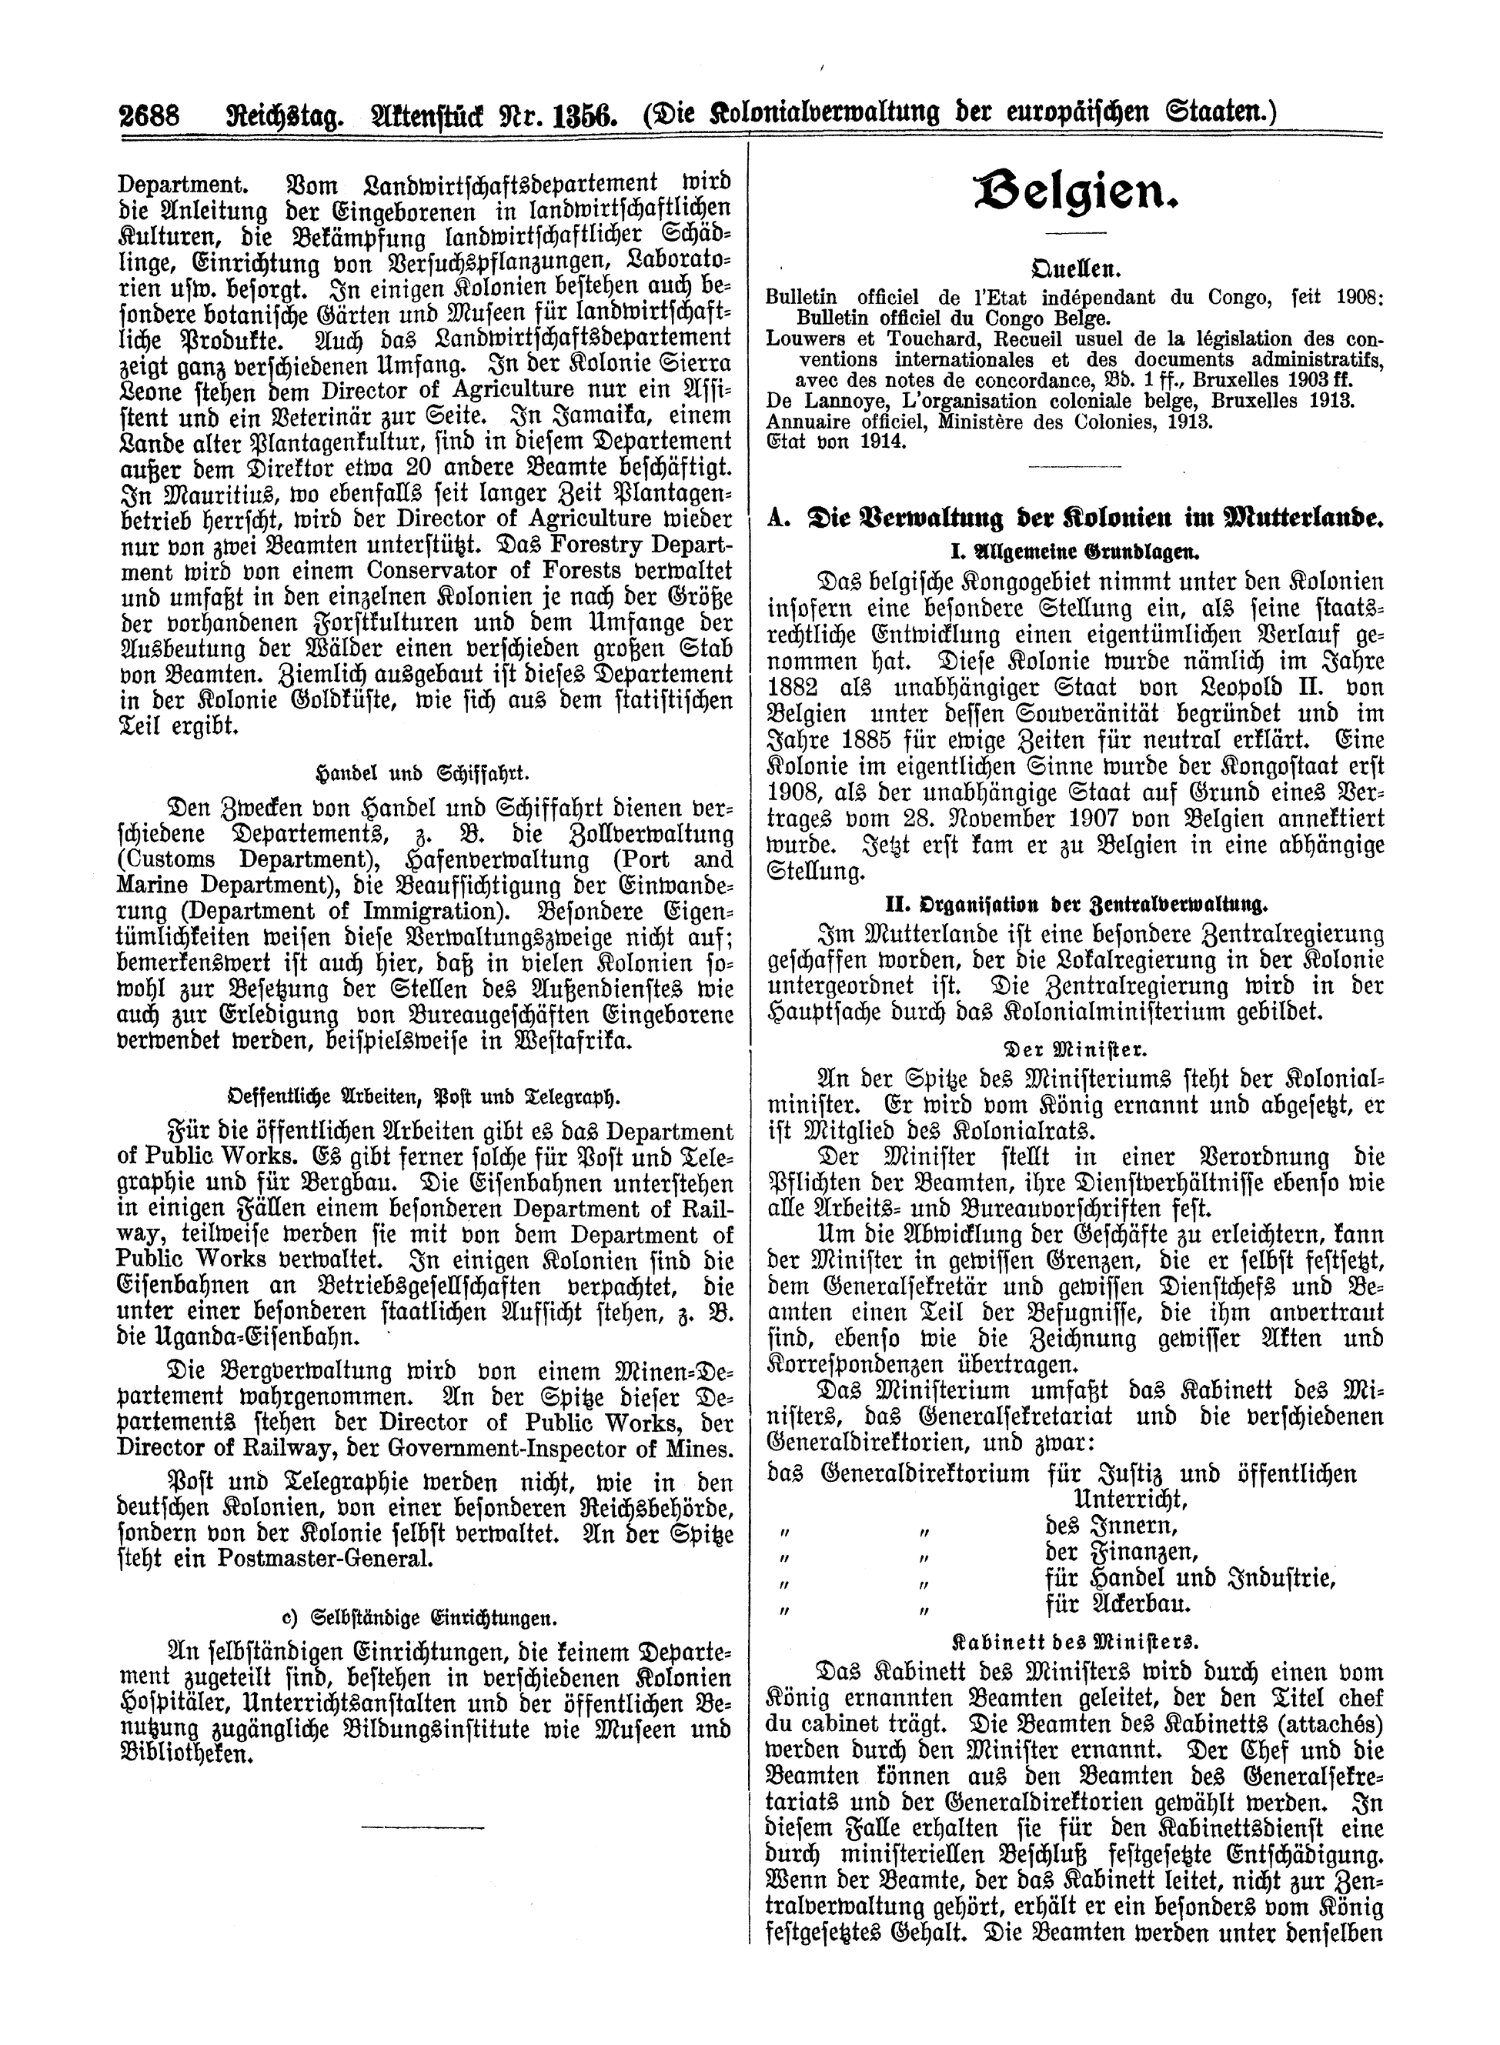 Scan of page 2688